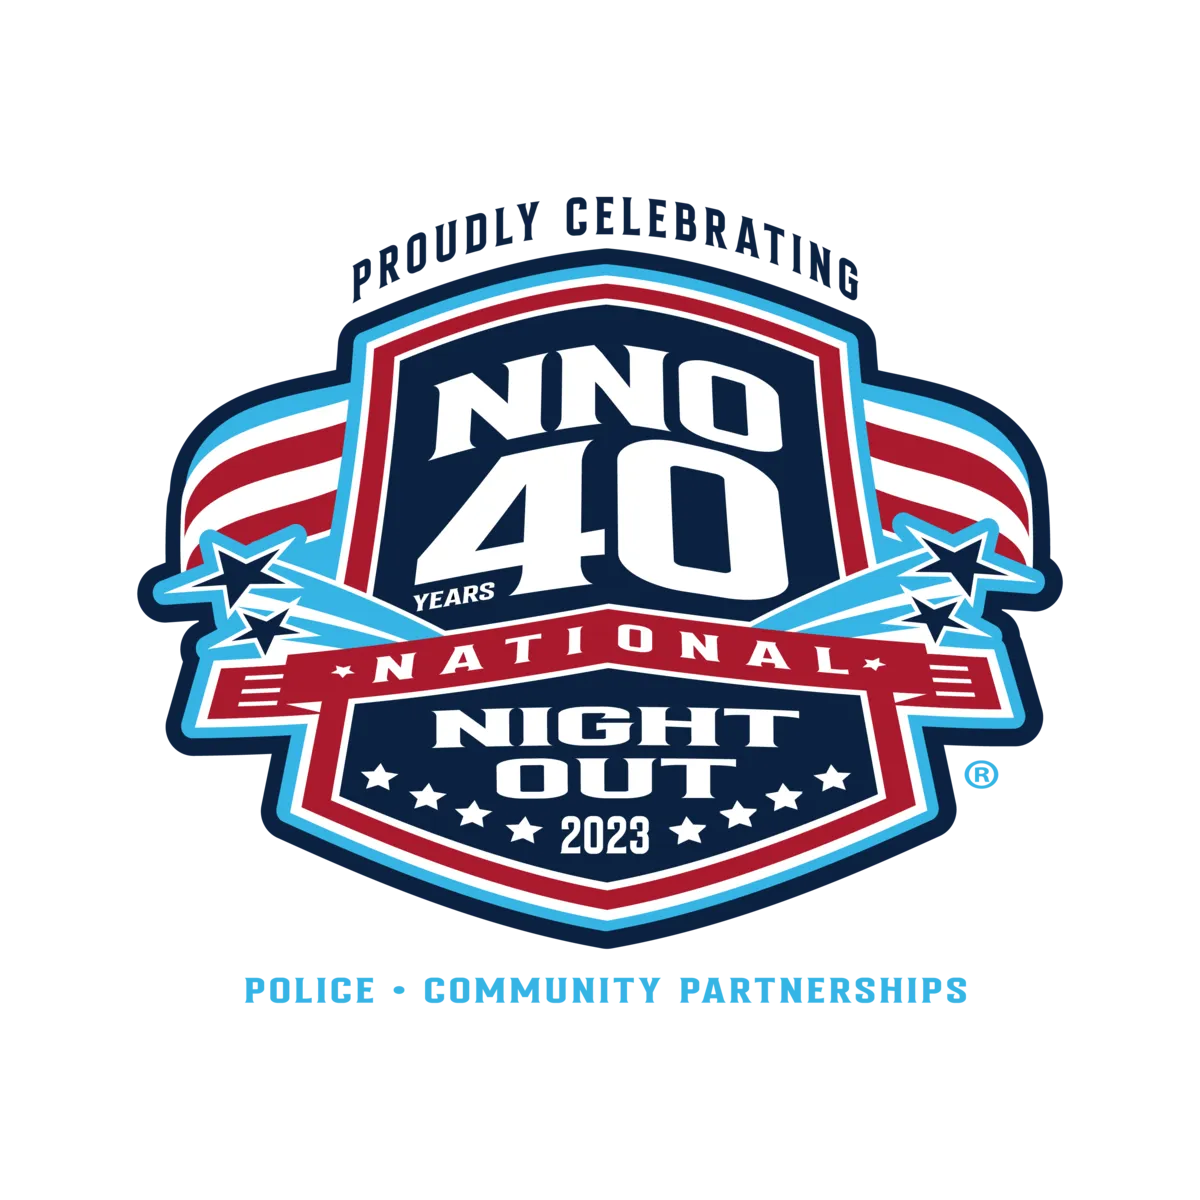 Save the Date! National Night Out is happening Tuesday, Aug 1, 2023!